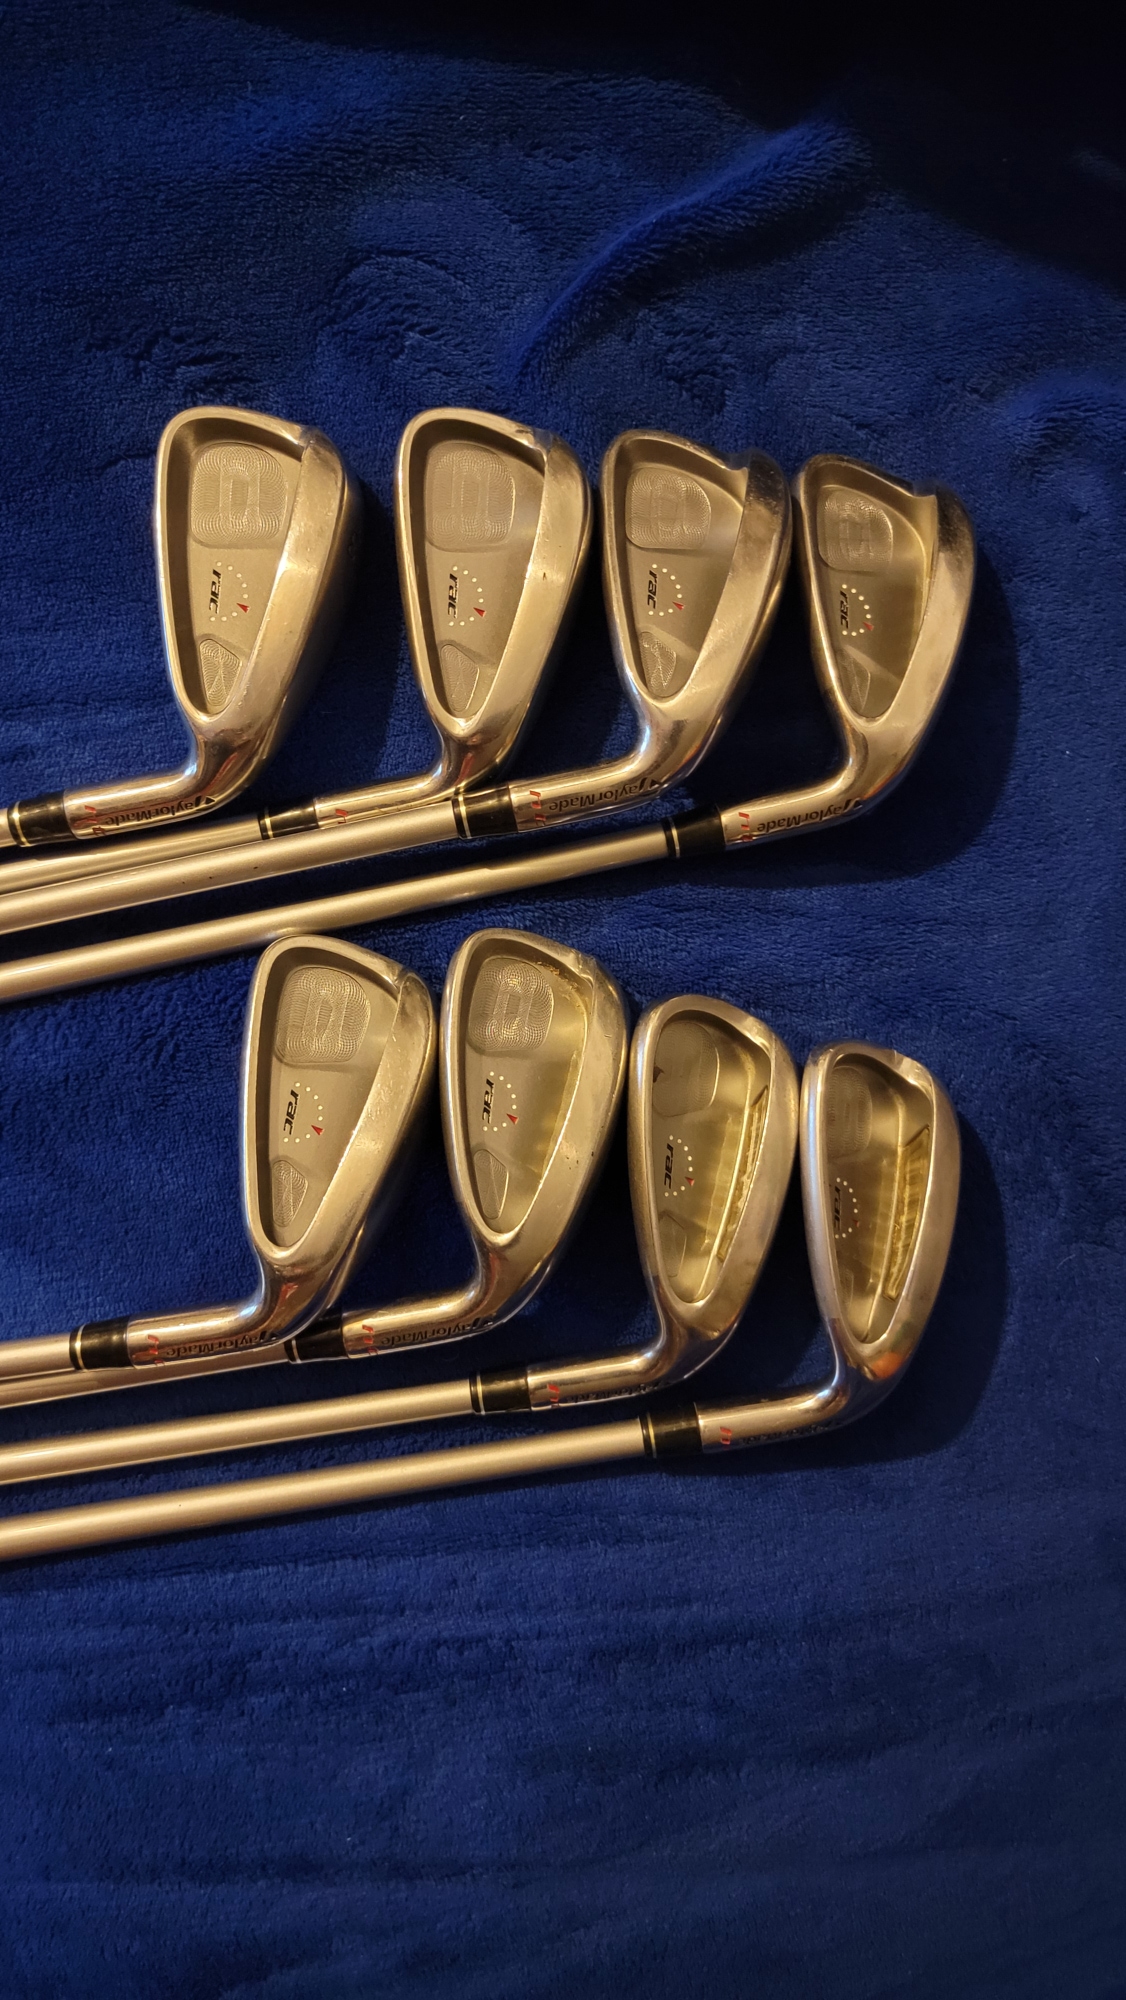 Used Men's TaylorMade Right Handed Rac HT Iron Set Regular Flex 8 Pieces Graphite Shaft